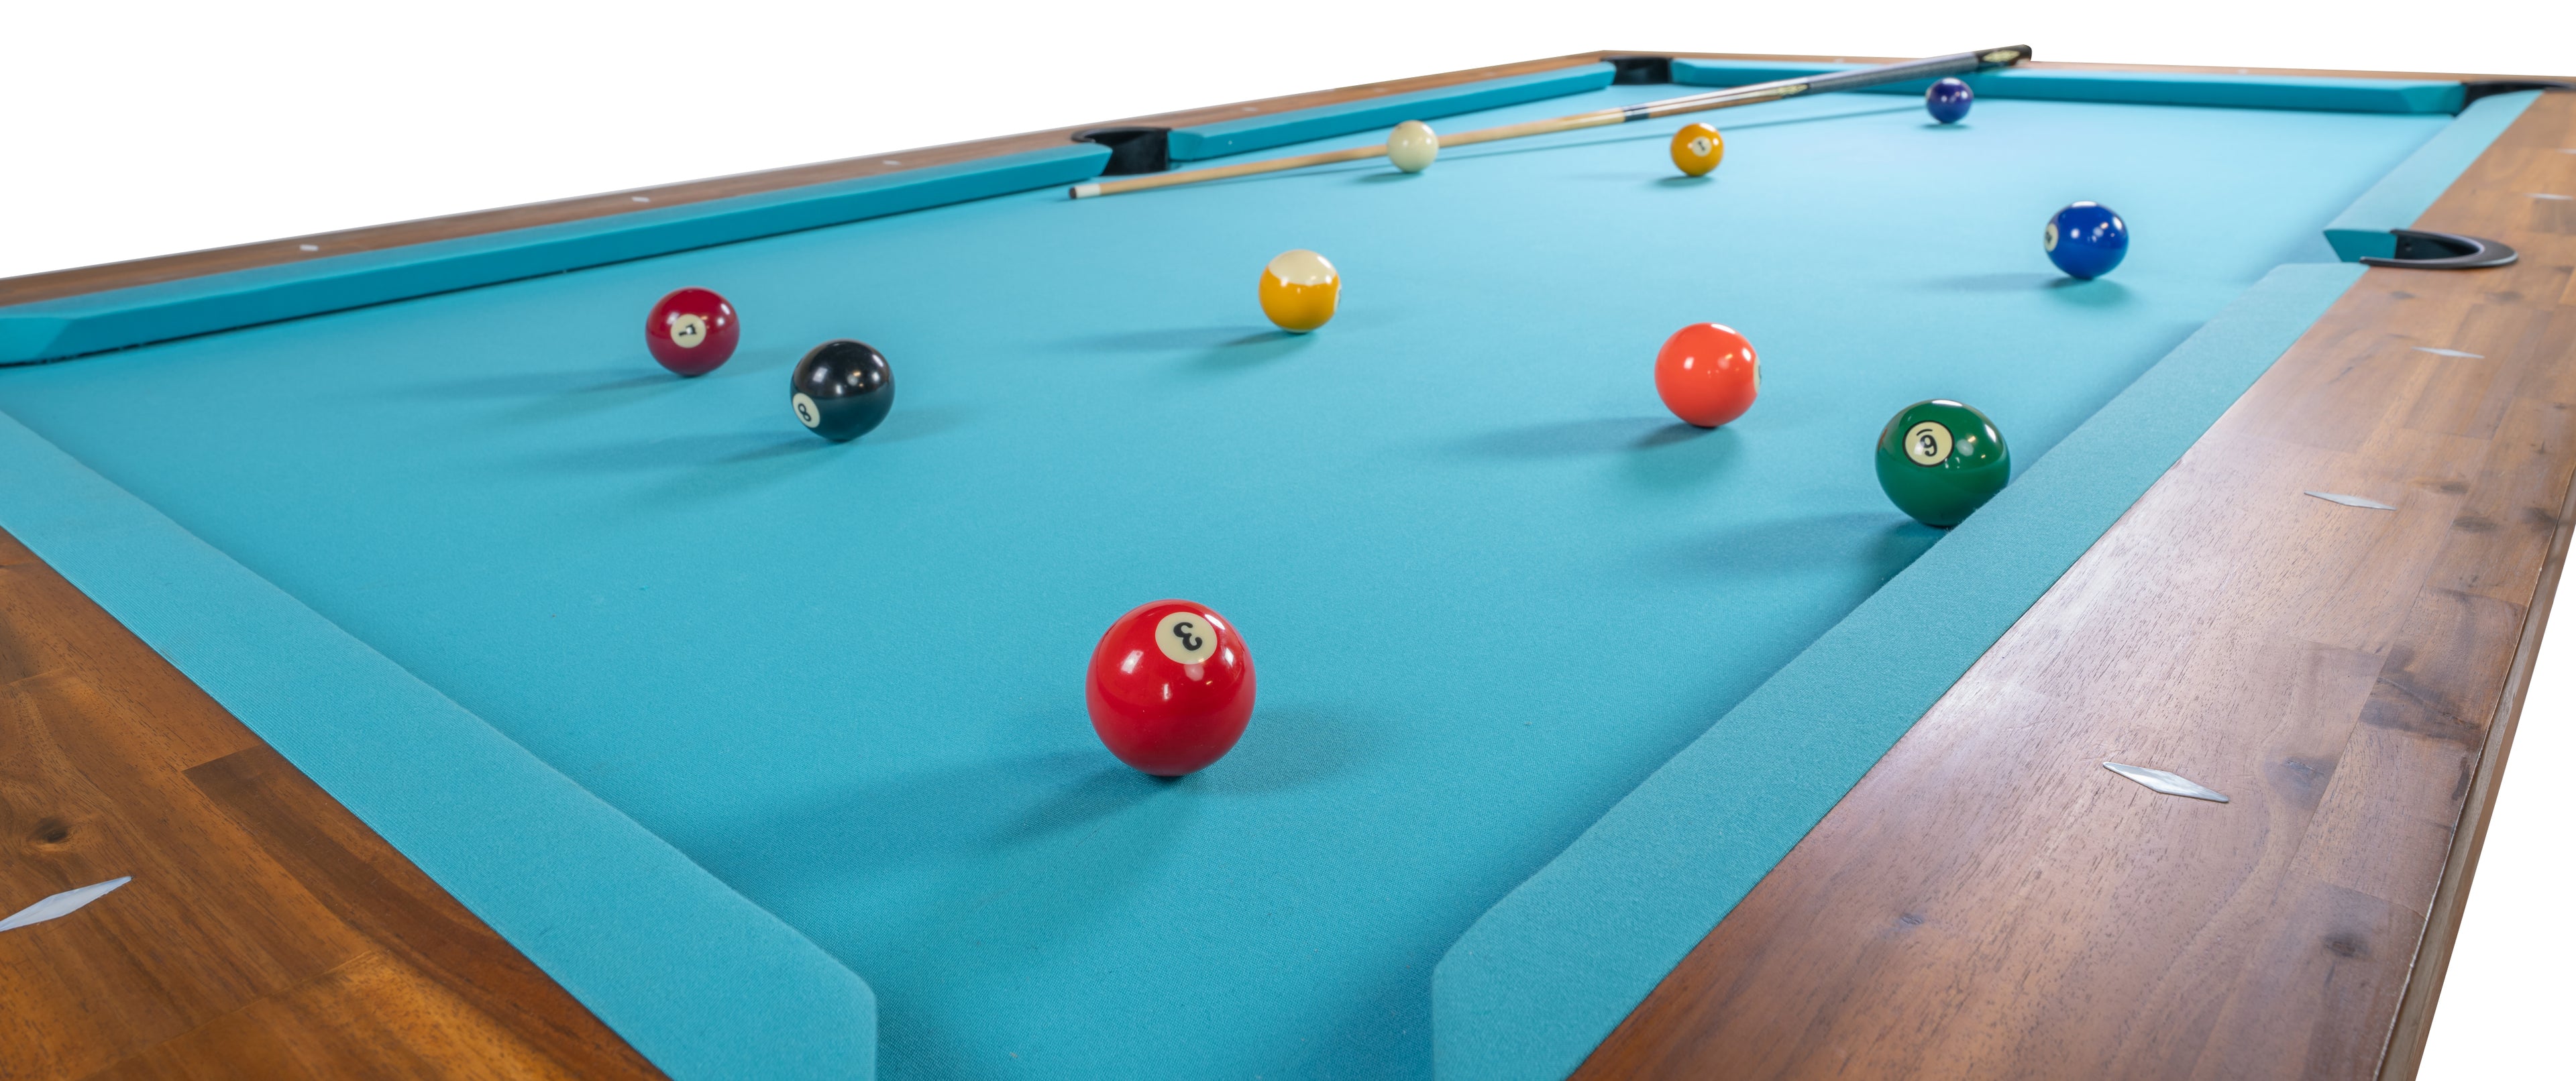 Legacy Billiards Emory 8 Ft Outdoor Pool Table in Natural Acacia Finish with Pool Aqua Cloth Corner Closeup with Pool Balls and Cue